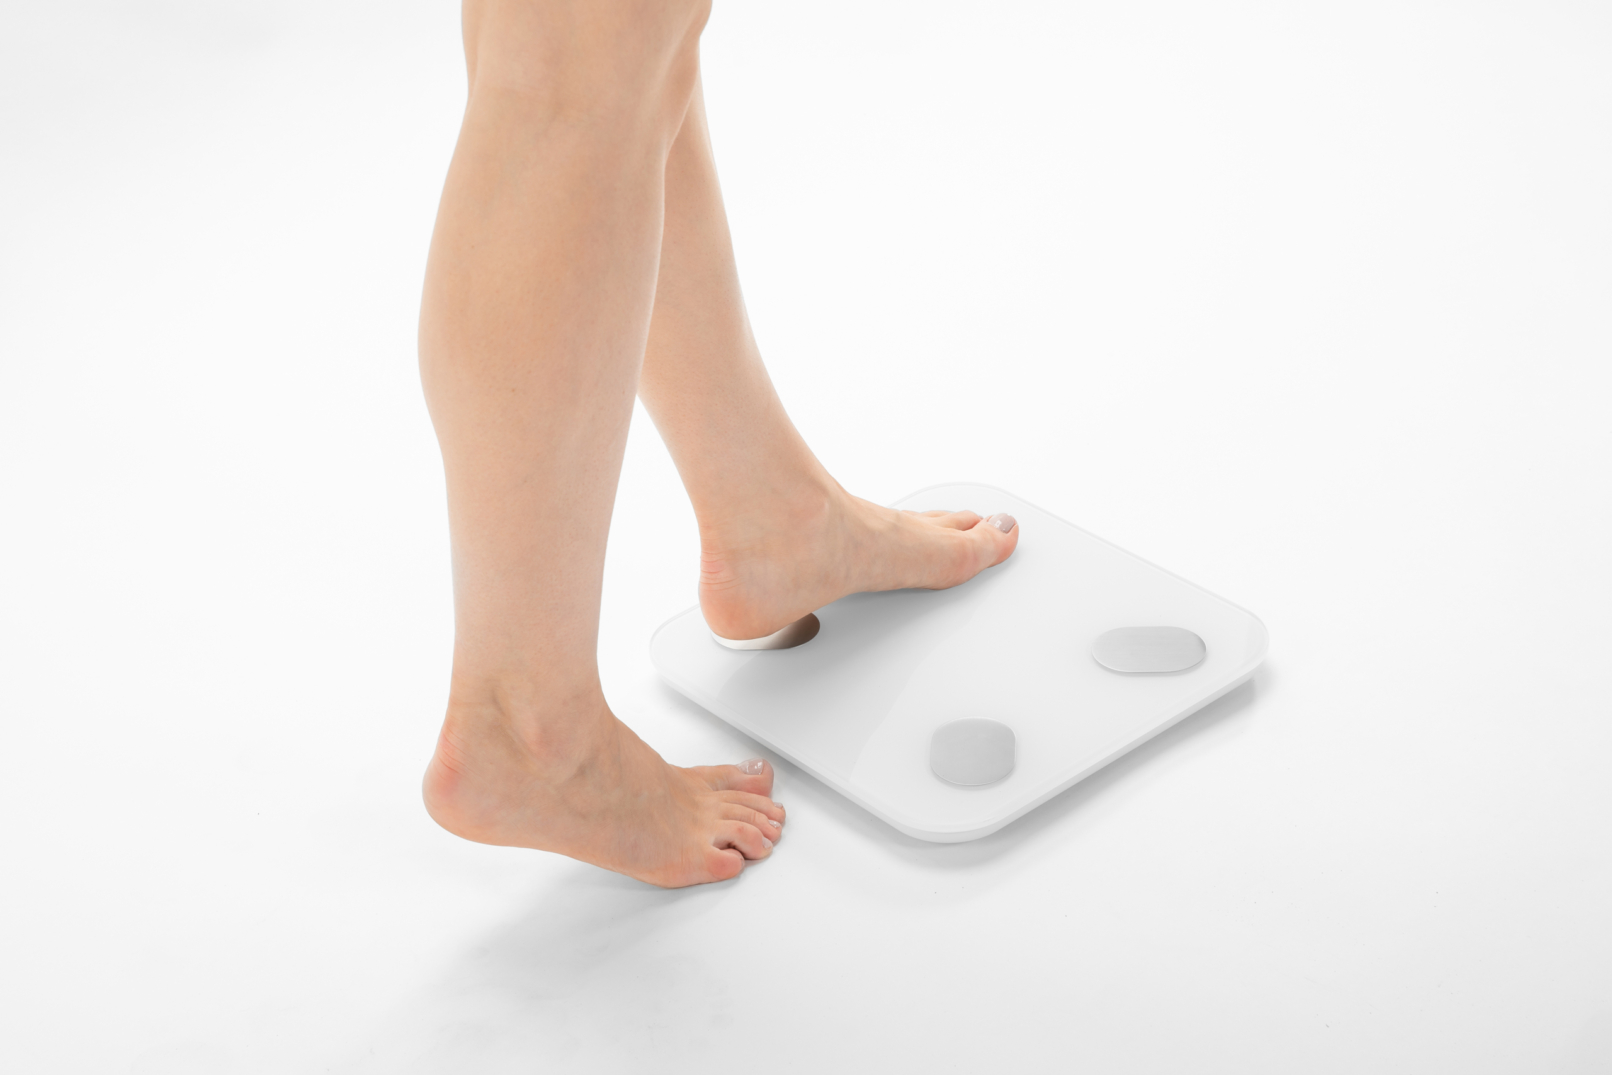 Young woman with bare legs stepping onto the PDS-200C Personal Digital Scale